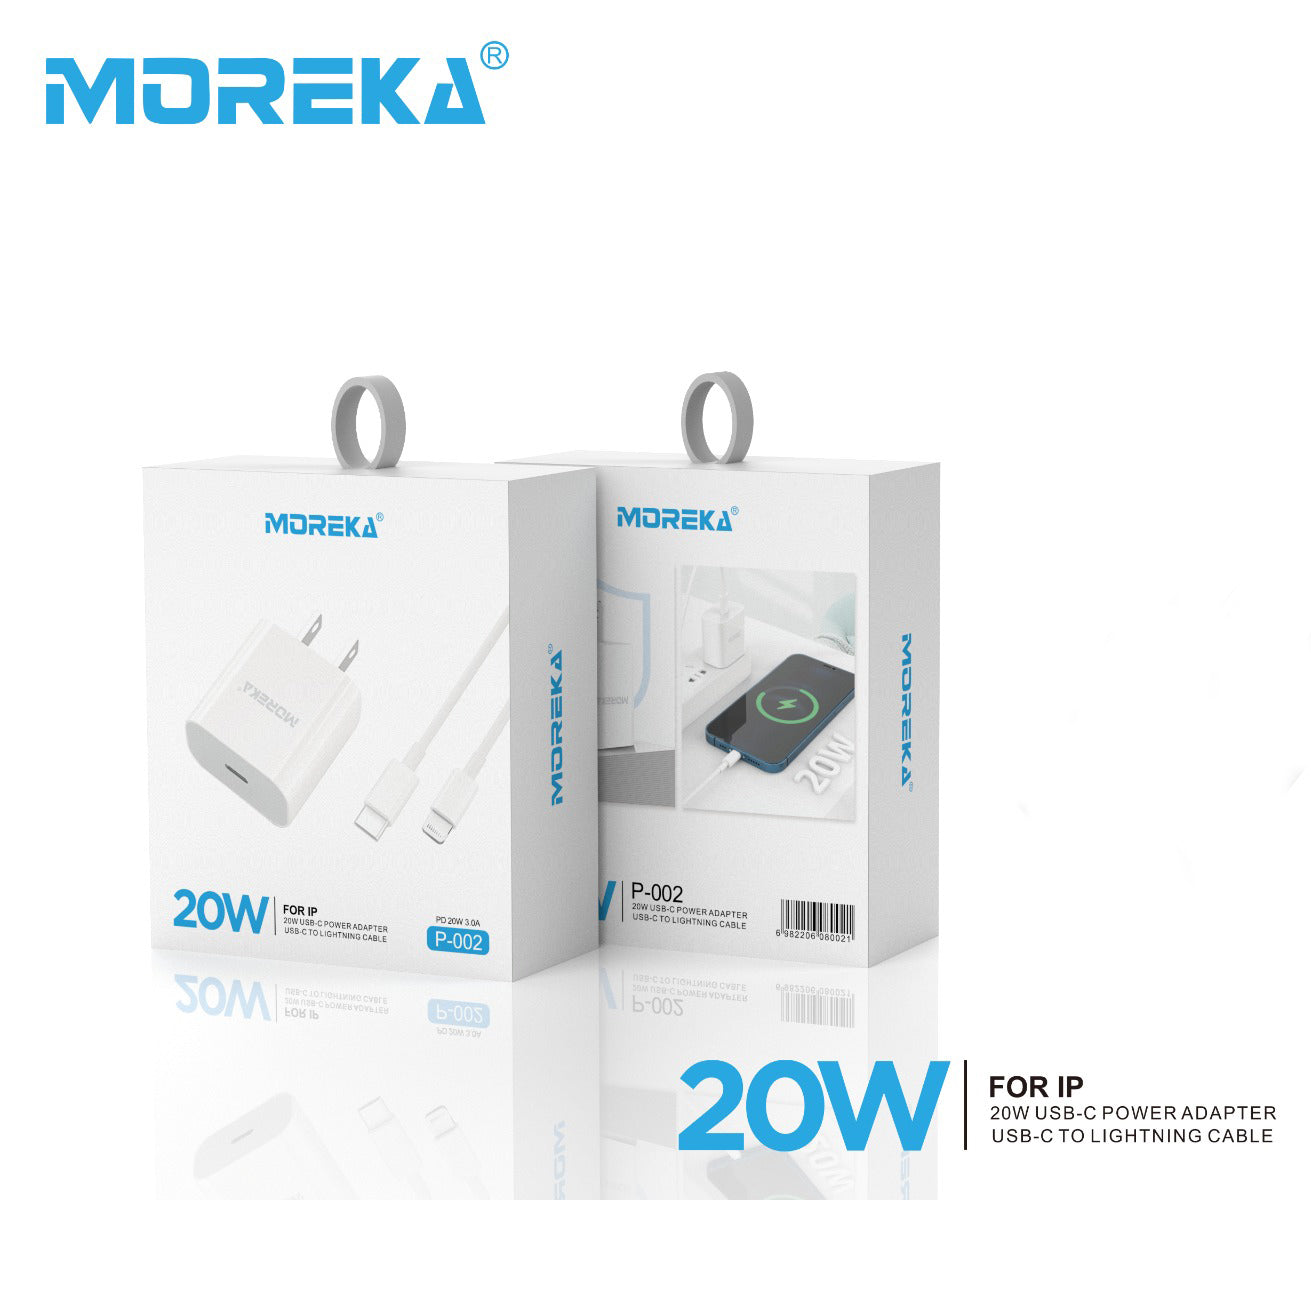 IP Type Charger MOREKA P-002 20W, 3.1A Includes IP Cable